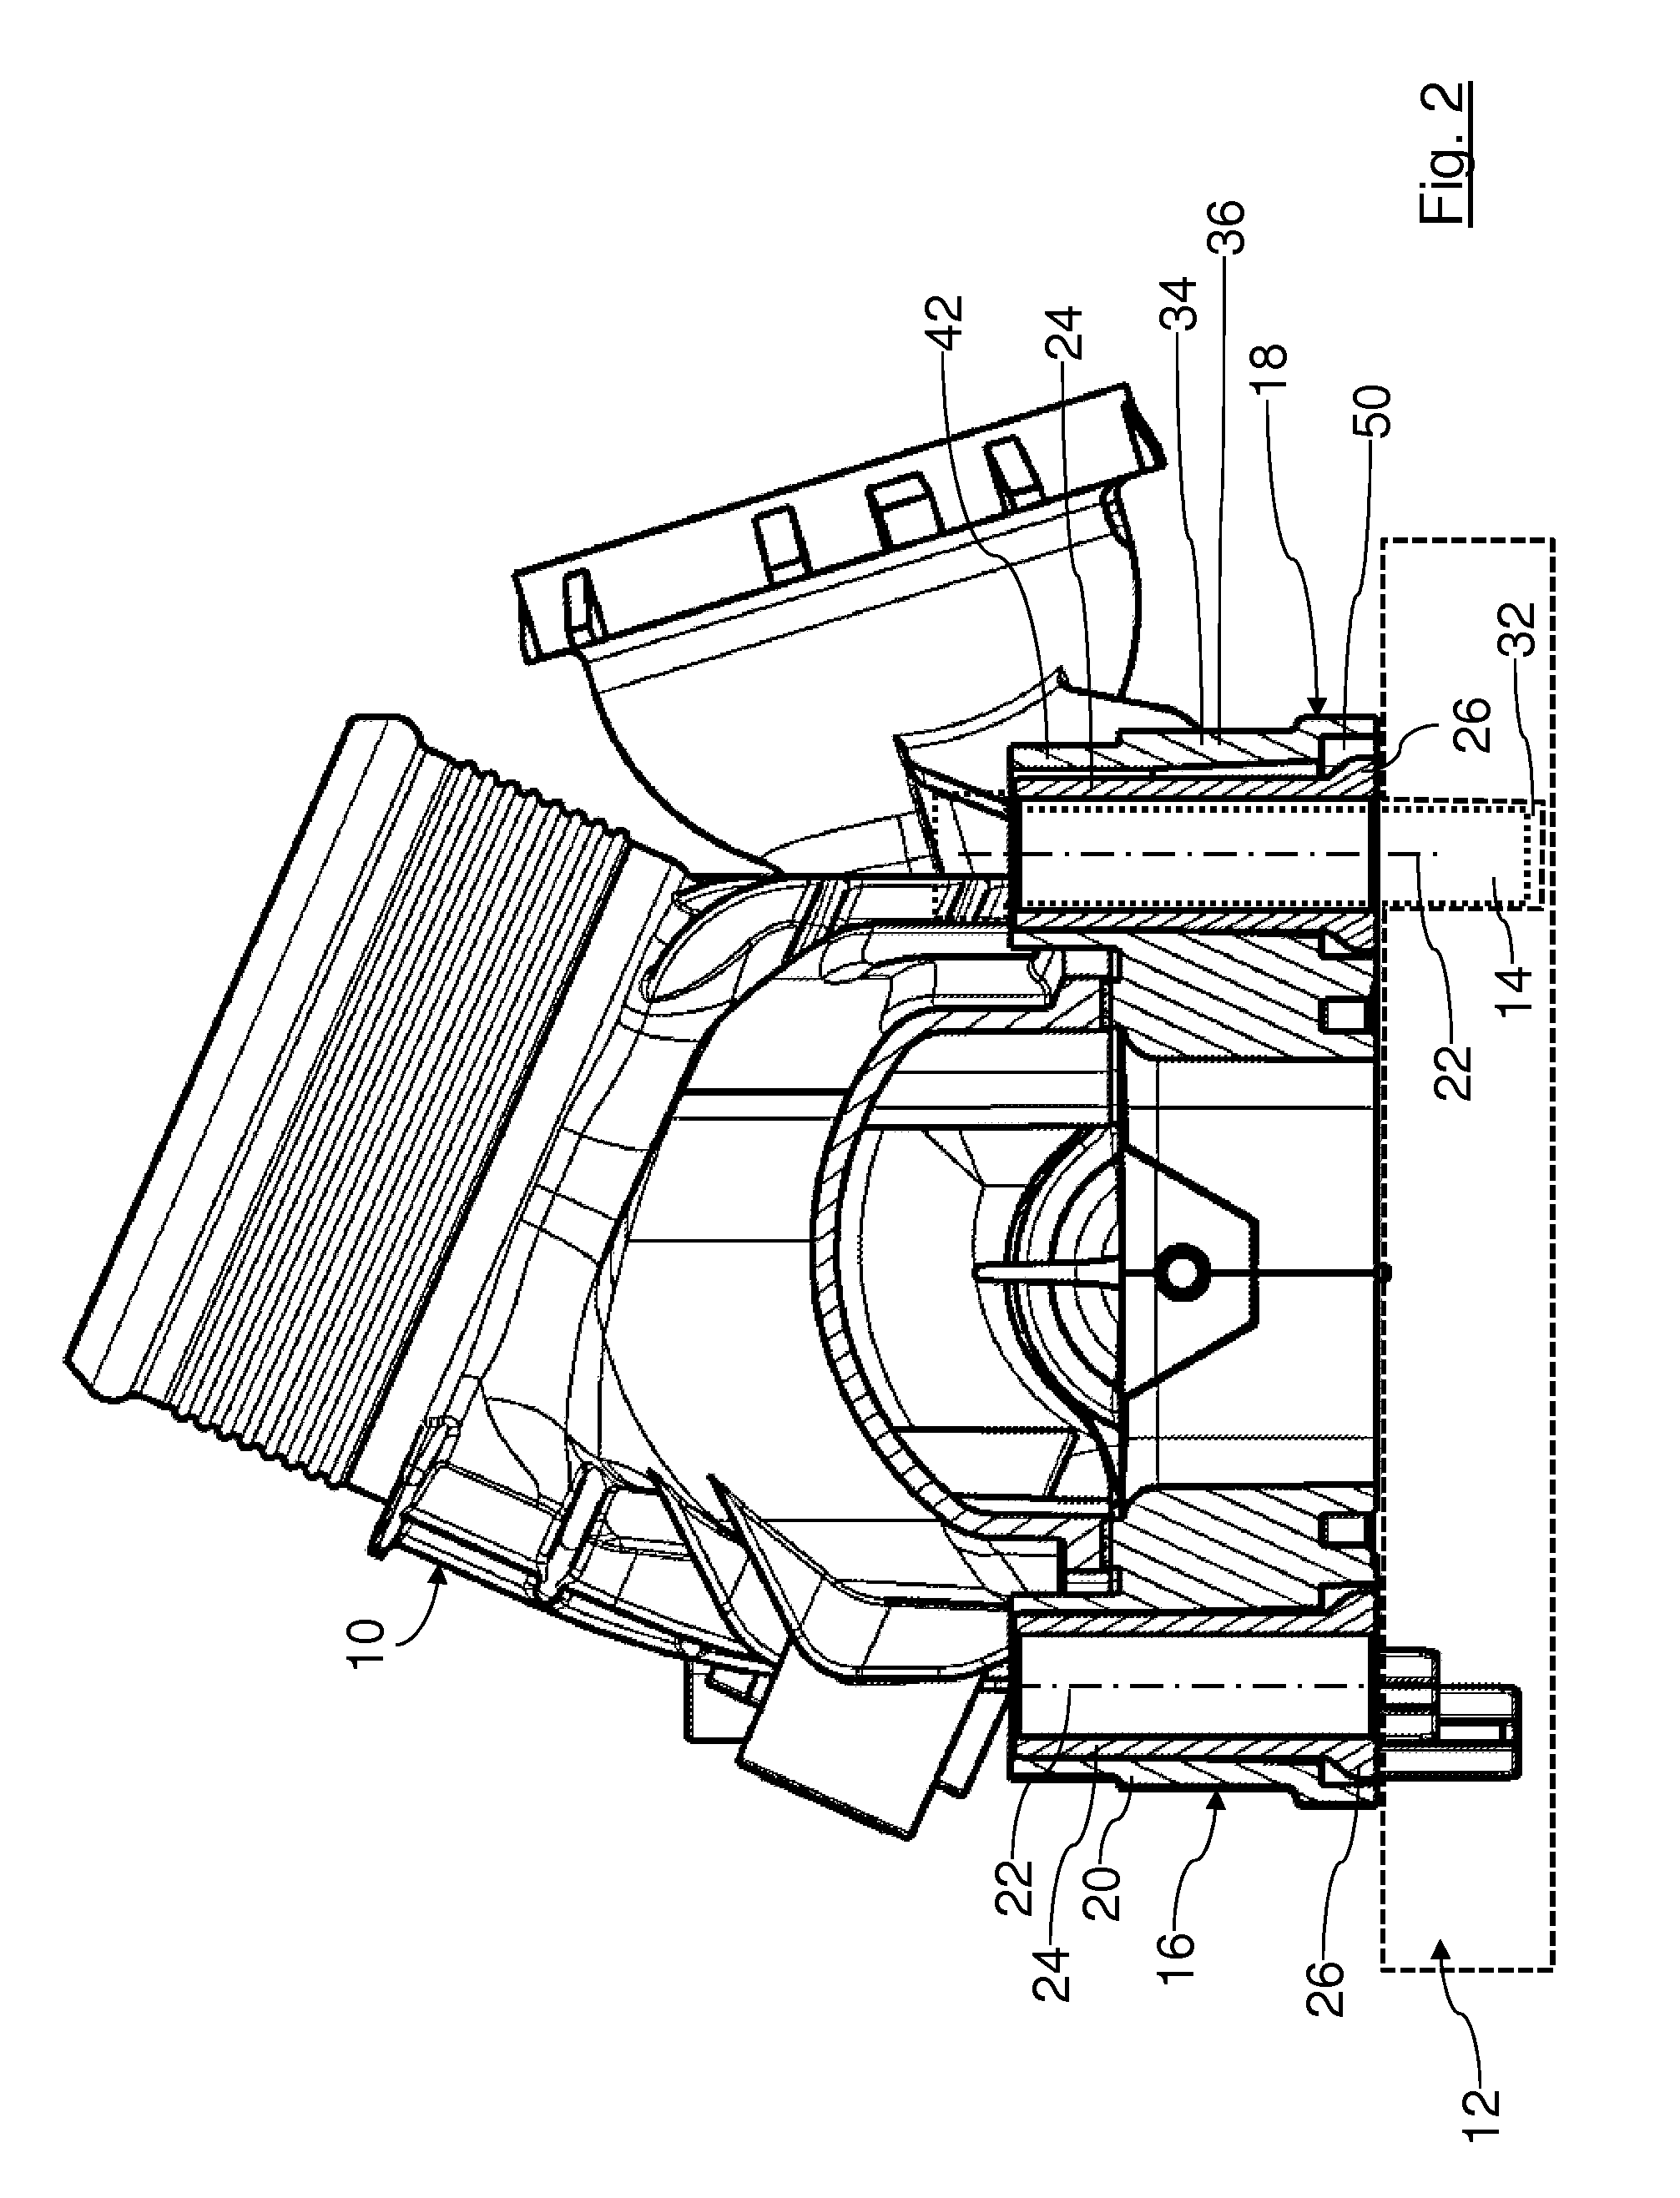 Detachable Connecting Device for Connecting at Least Two Functional Components and Functional Components